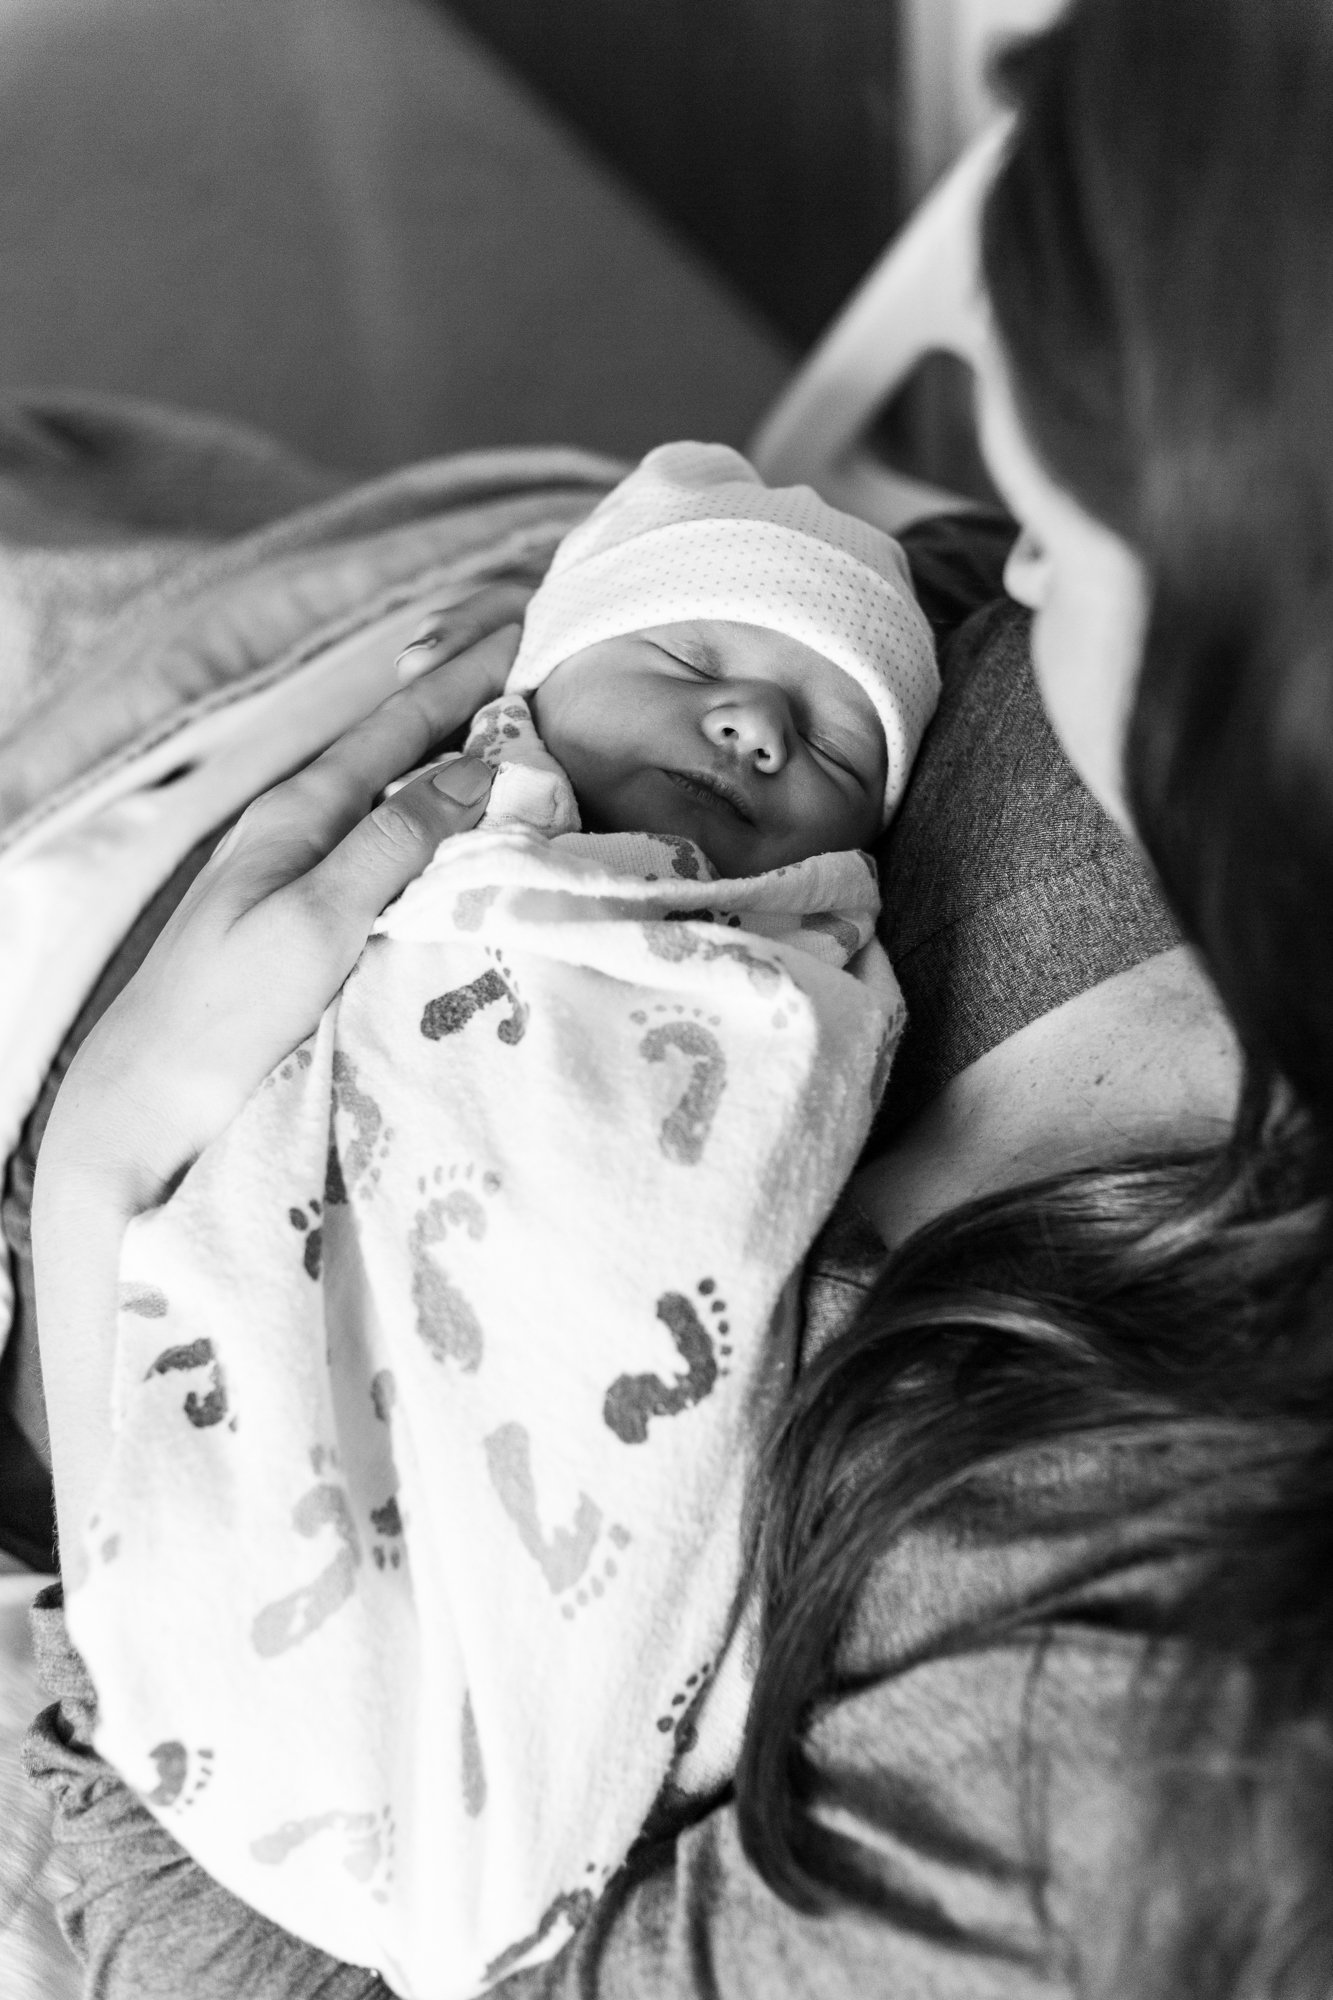 how to take DIY c-section photos by photography course for parents capturing everyday magic Cristin More_23.jpg